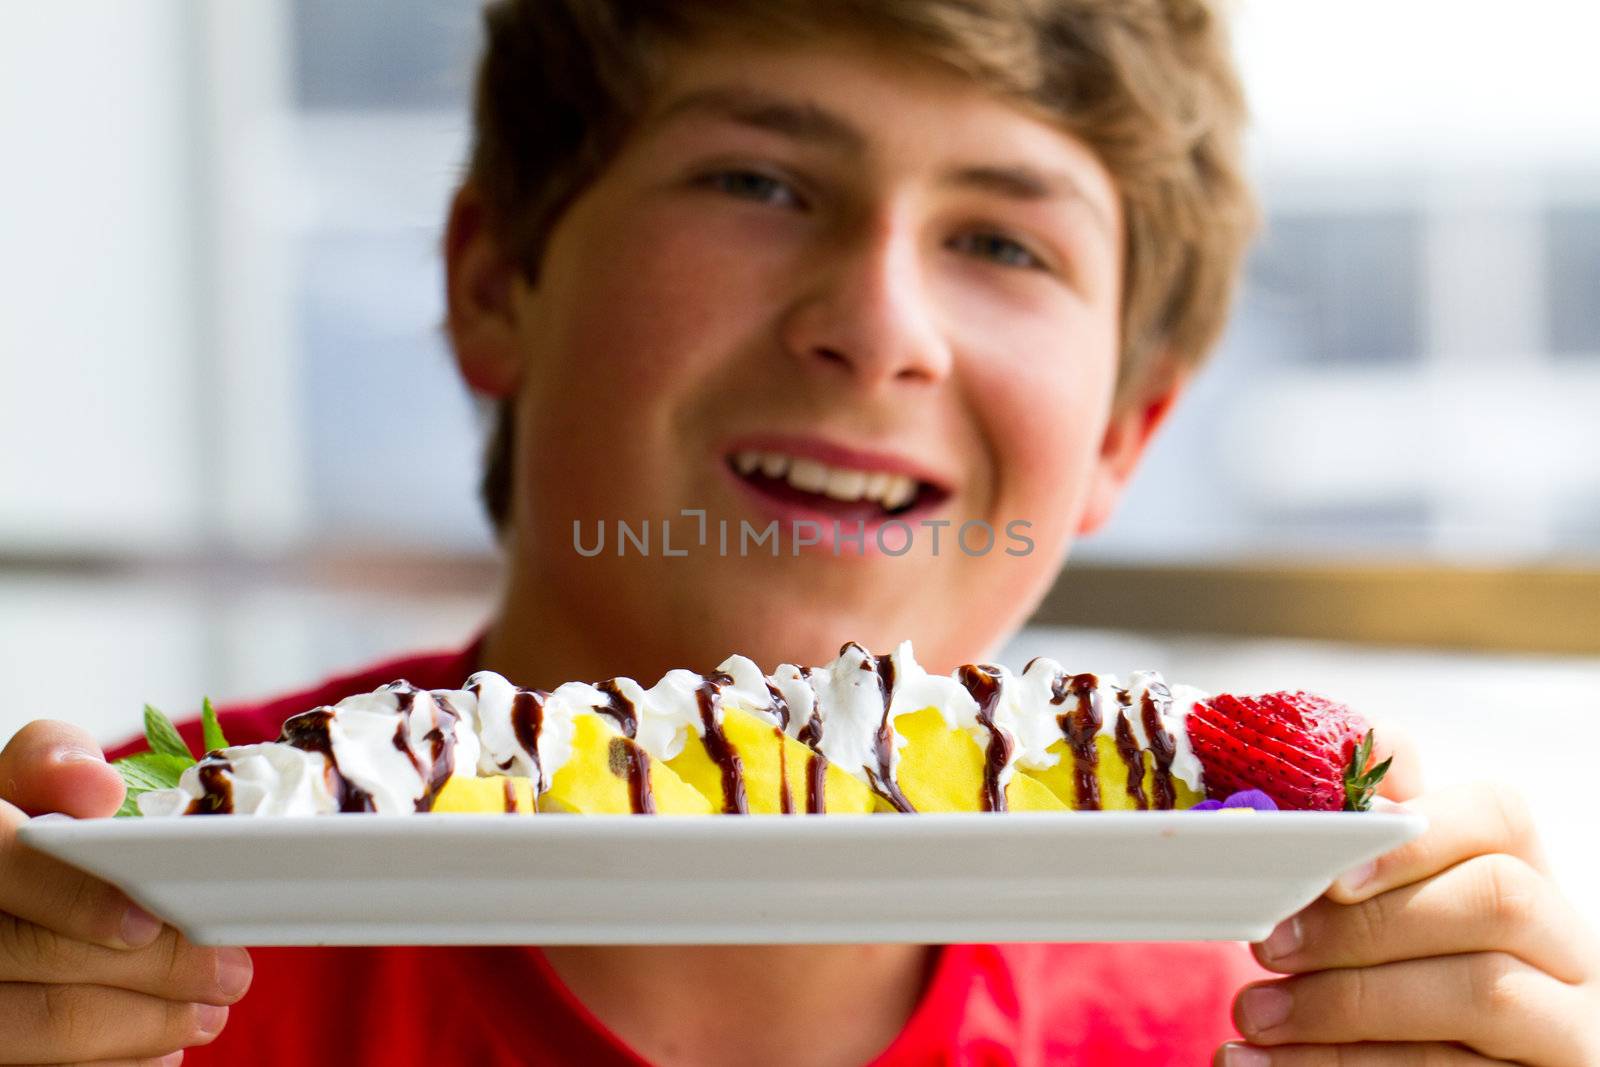 Teenager holding a sushi dessert made with Bannana, strawberries, chocolate and whip cream